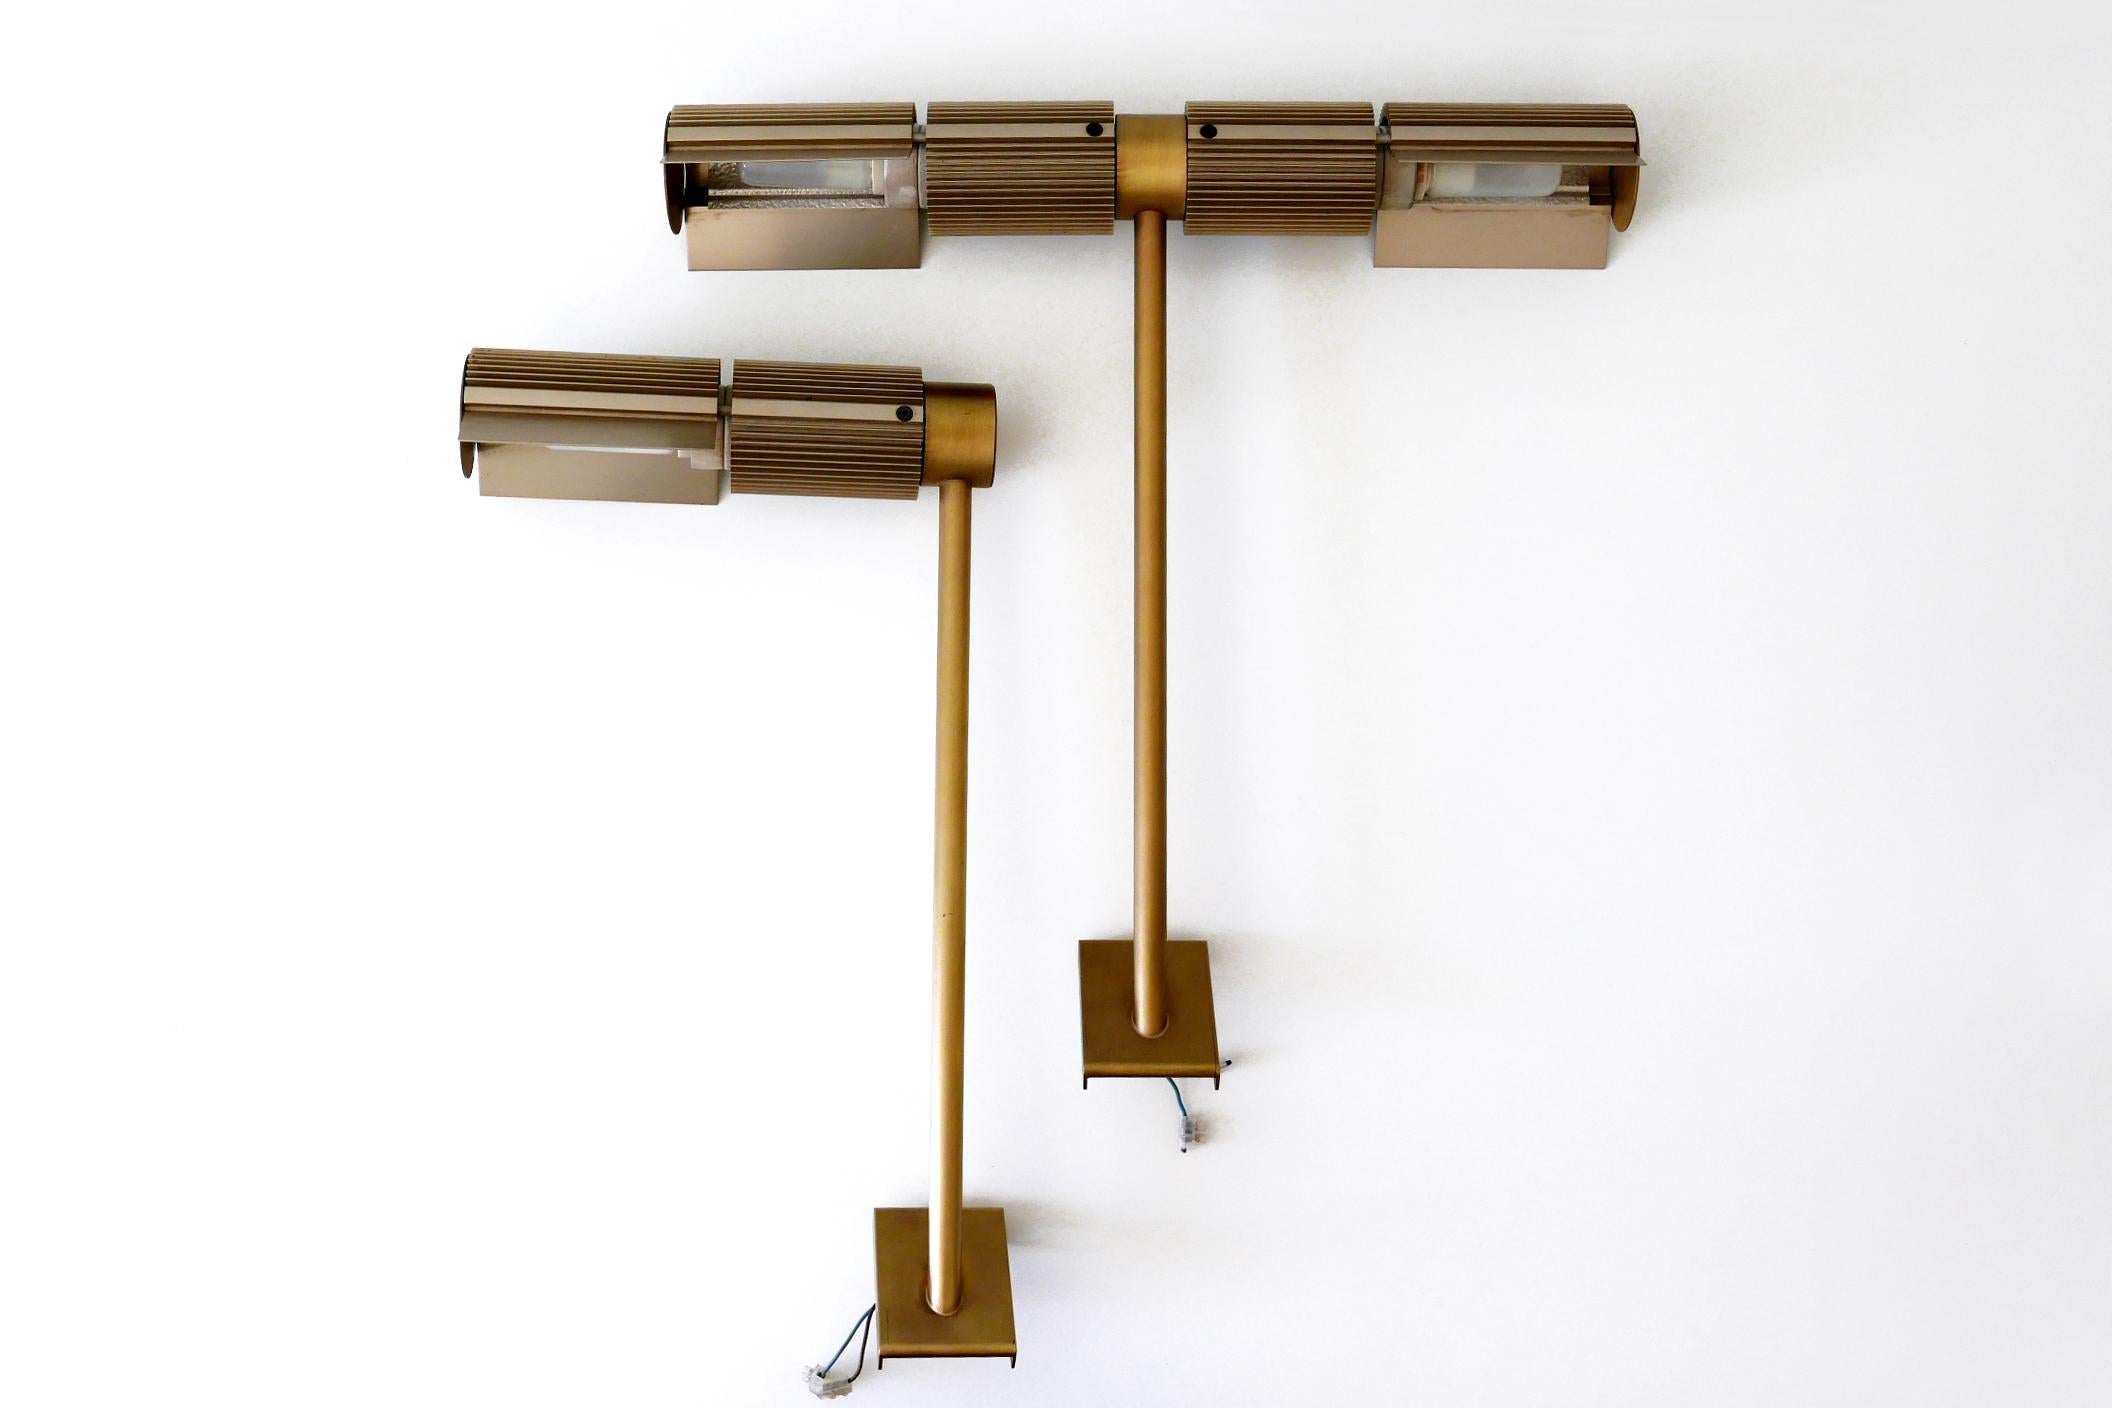 Set of two rare and elegant Mid-Century Modern Haloprofil sconces / wall lamps / gallery lamps with rotating reflectors. Designed by V. Frauenknecht for Swisslamps International, Switzerland, 1970s.

Executed in anodized aluminium, one of the